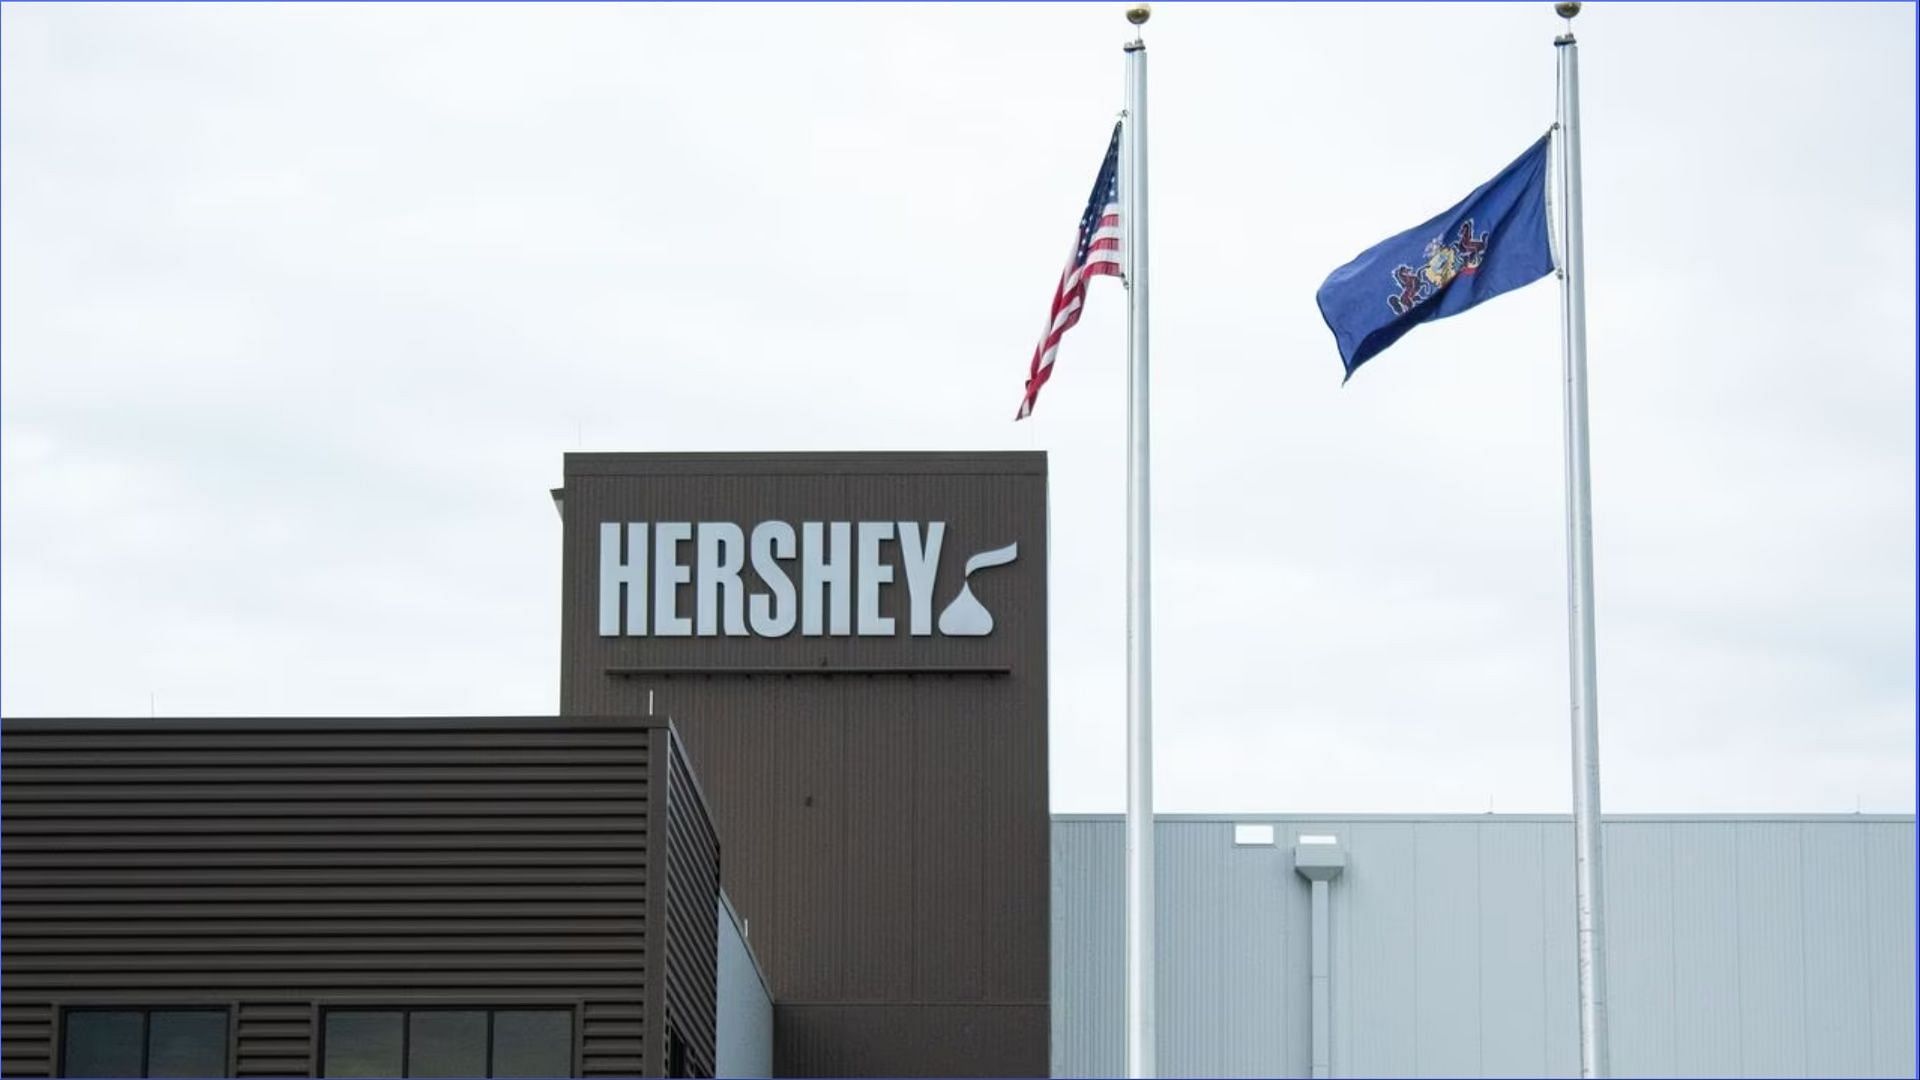 Consumer Reports flags Hershey products for high levels of lead and cadmium (Image via Hershey)